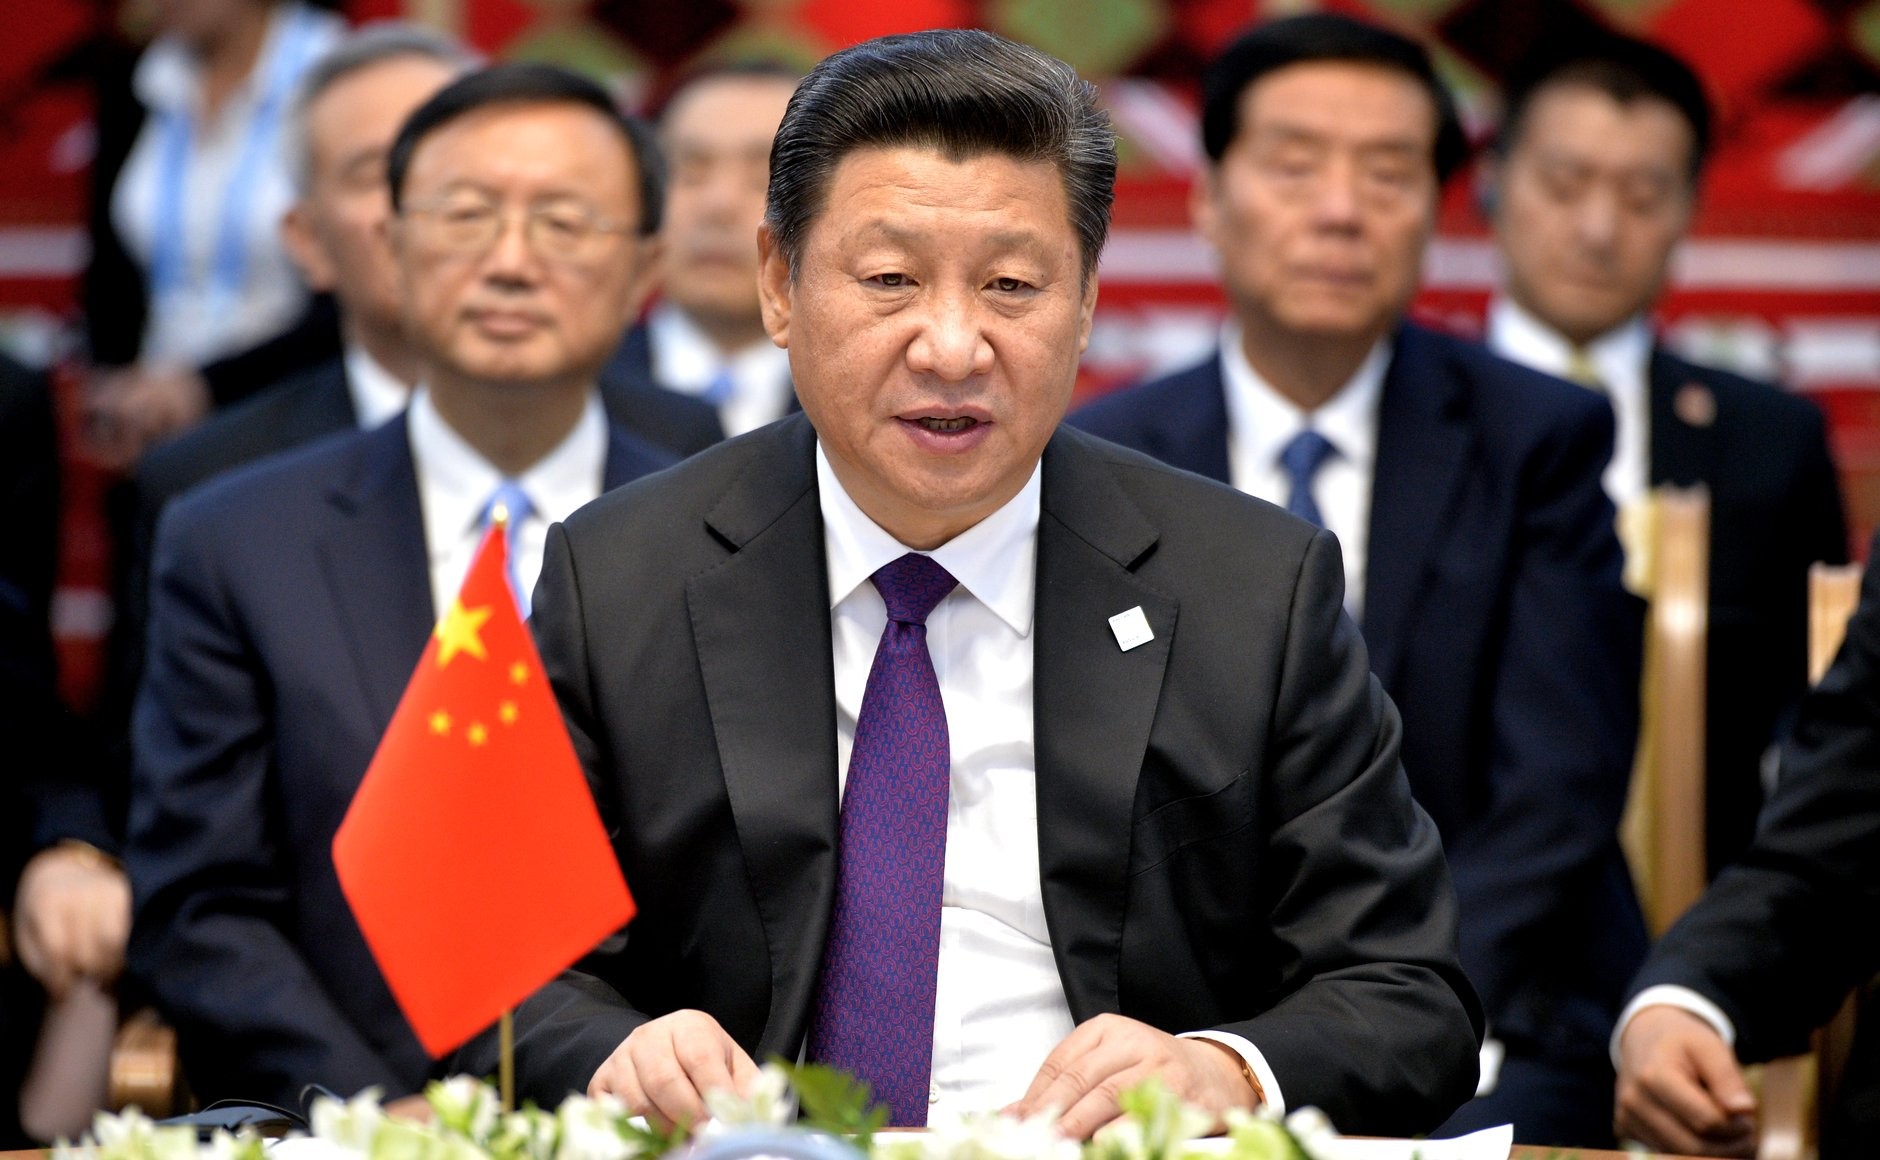 It’s Likely China Will Enter Another Long Period of Severe Dictatorship